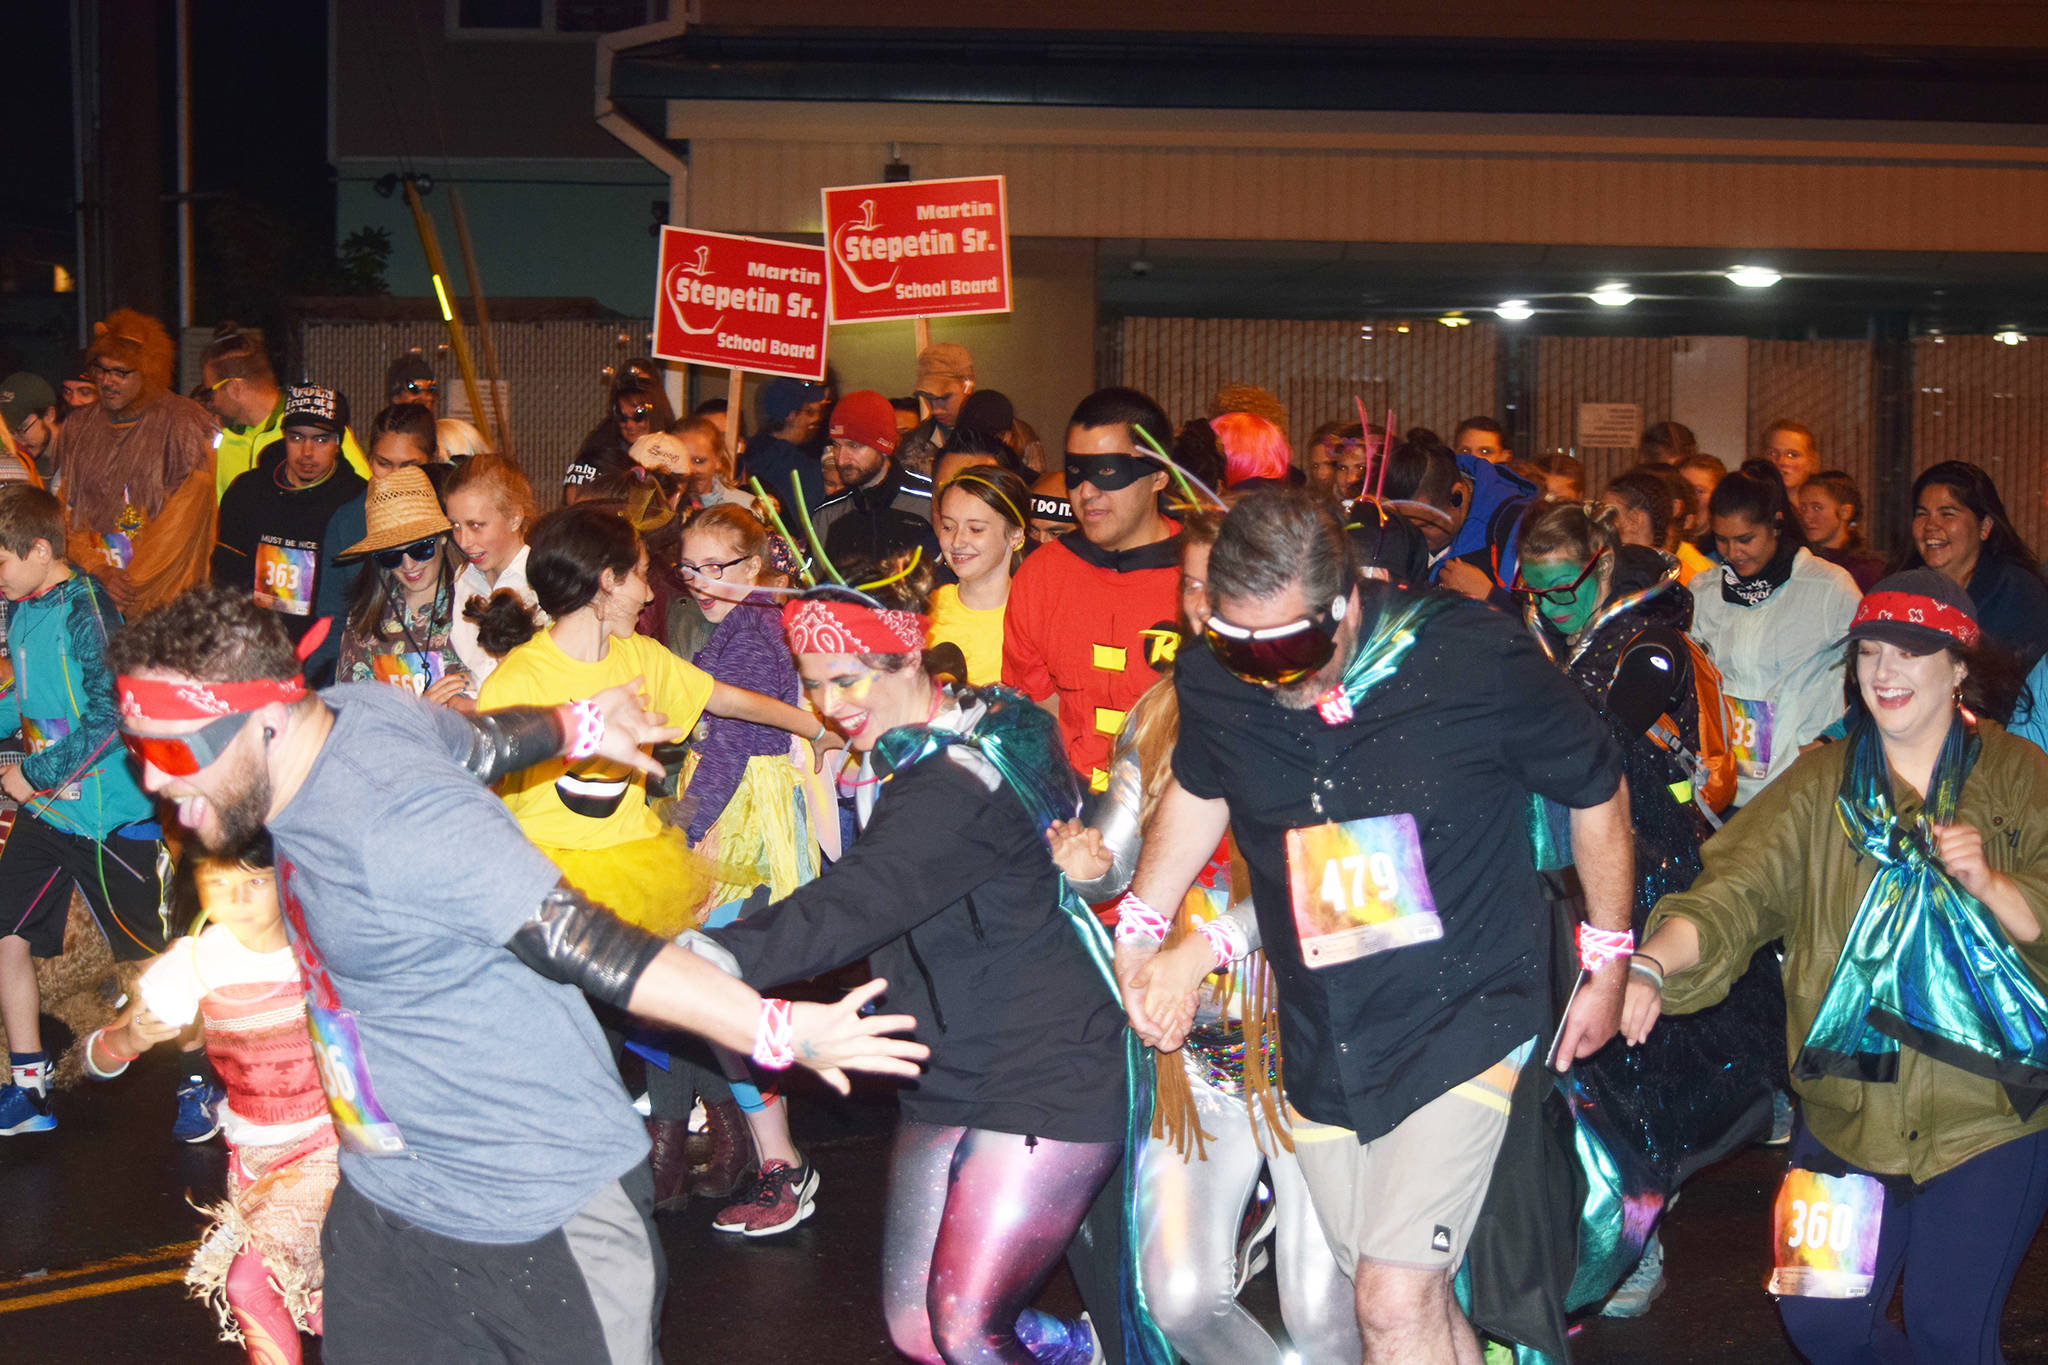 Runners take off from the starting line of the 35th annual Only Fools Run at Midnight at 11:59 p.m. on Saturday, Sept. 21, 2019. The event included a costume contest and 1-mile and 5-kilometer run/walk/wheelchair. (Nolin Ainsworth | Juneau Empire)